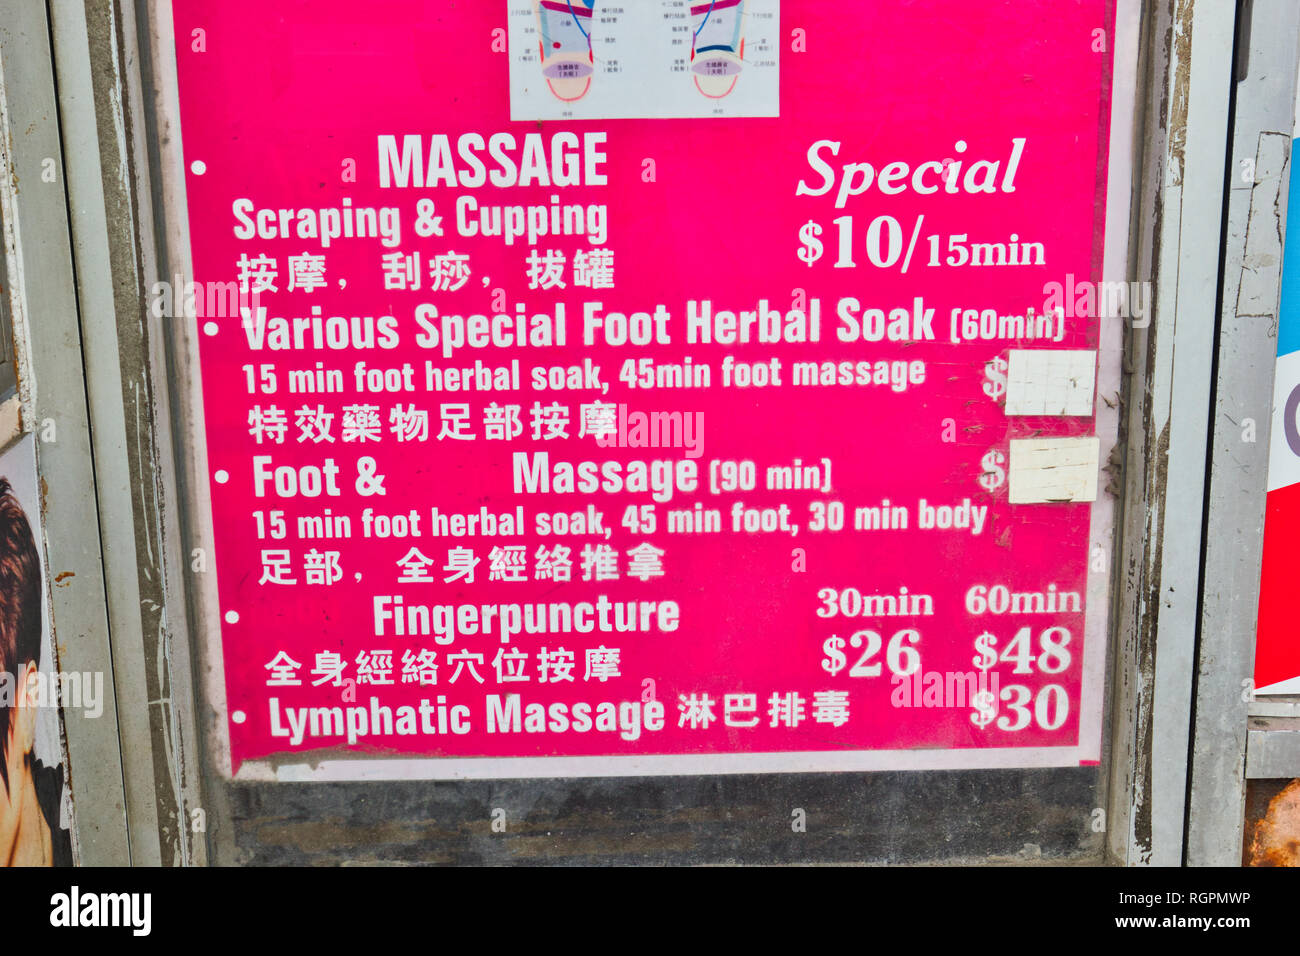 Sign in Chinese and English for foot and other massage treatments, Chinatown, Toronto, Ontario, Canada Stock Photo